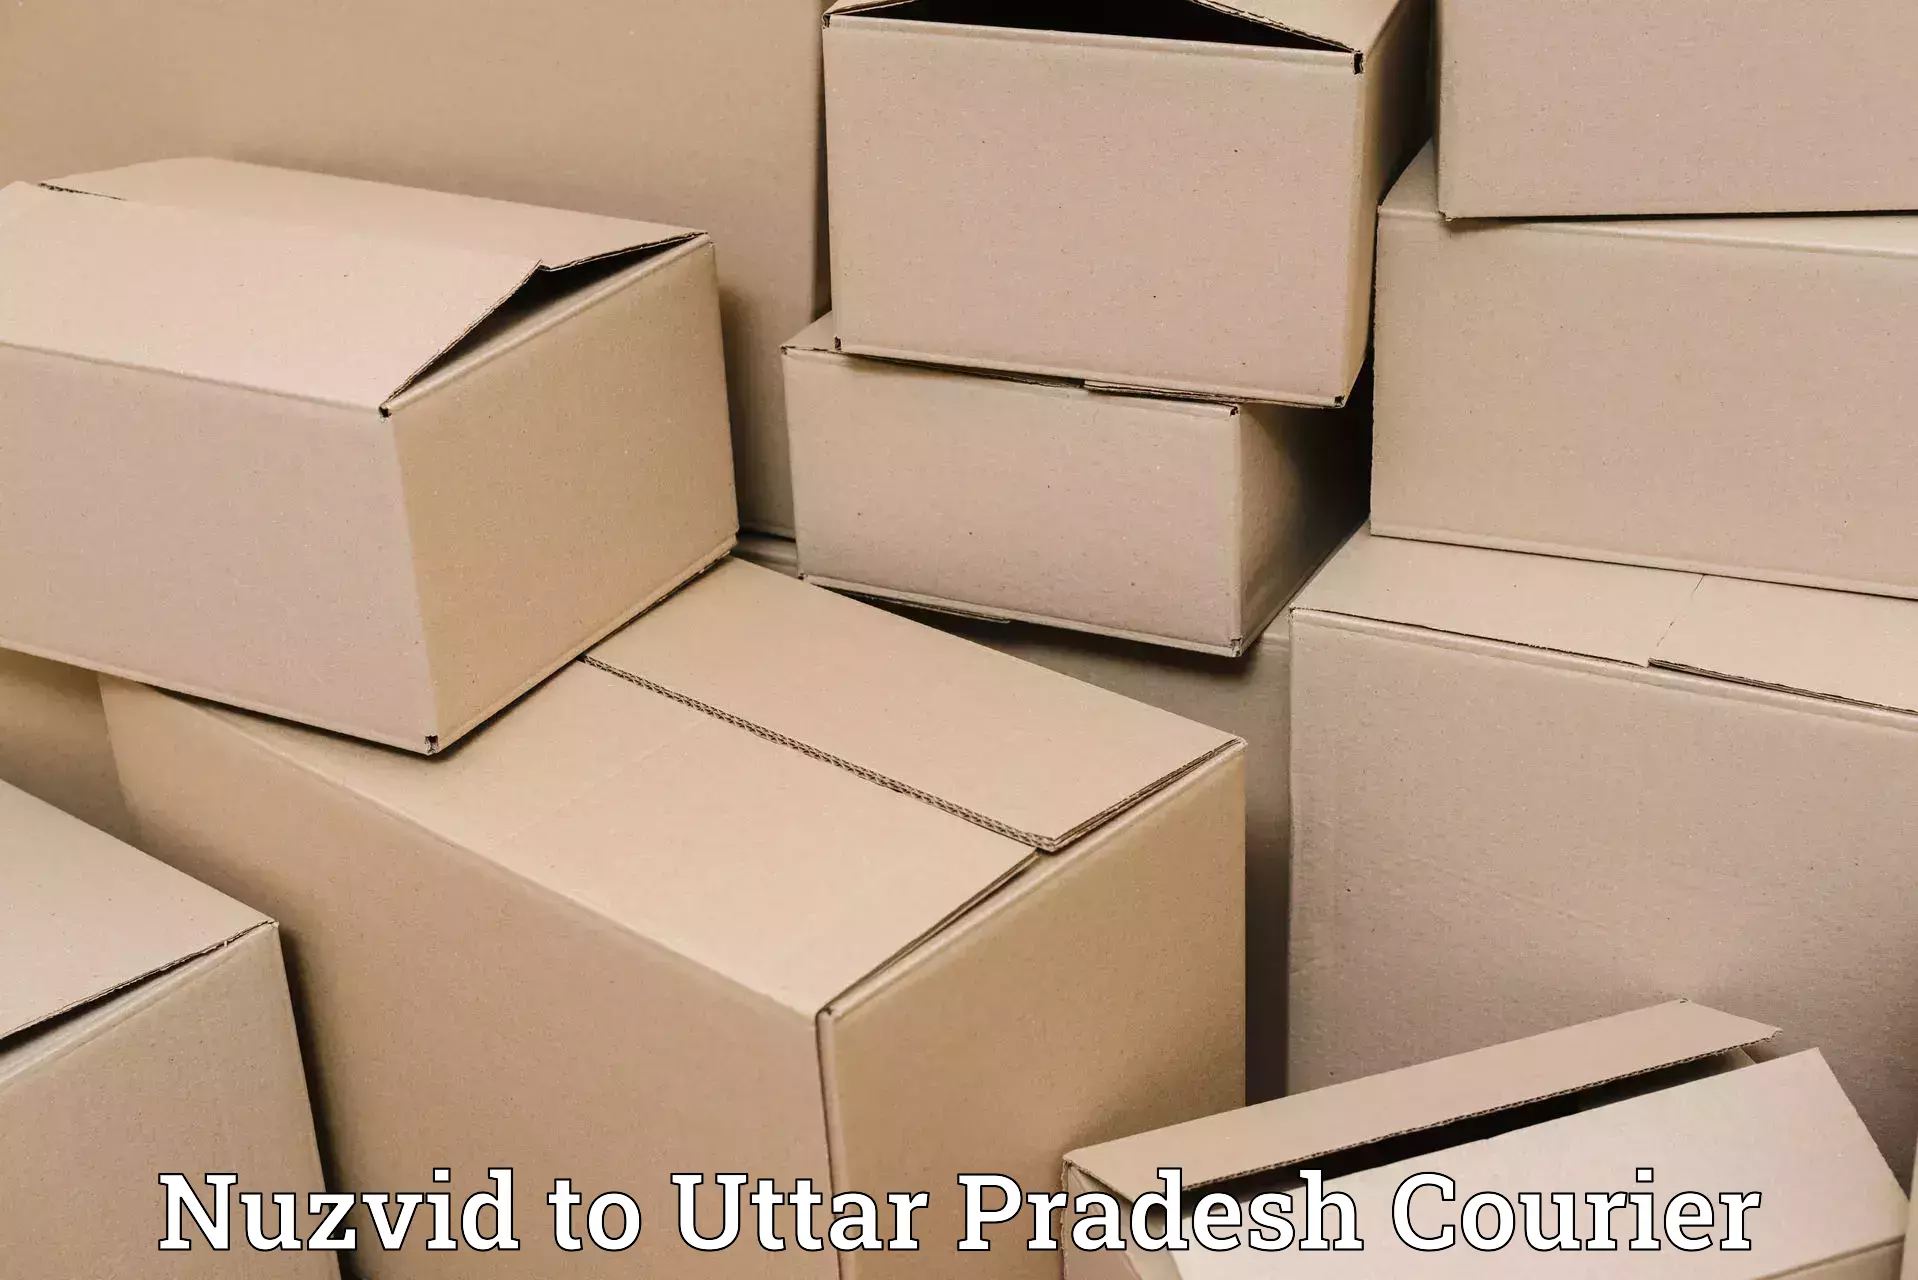 Cargo delivery service Nuzvid to Firozabad